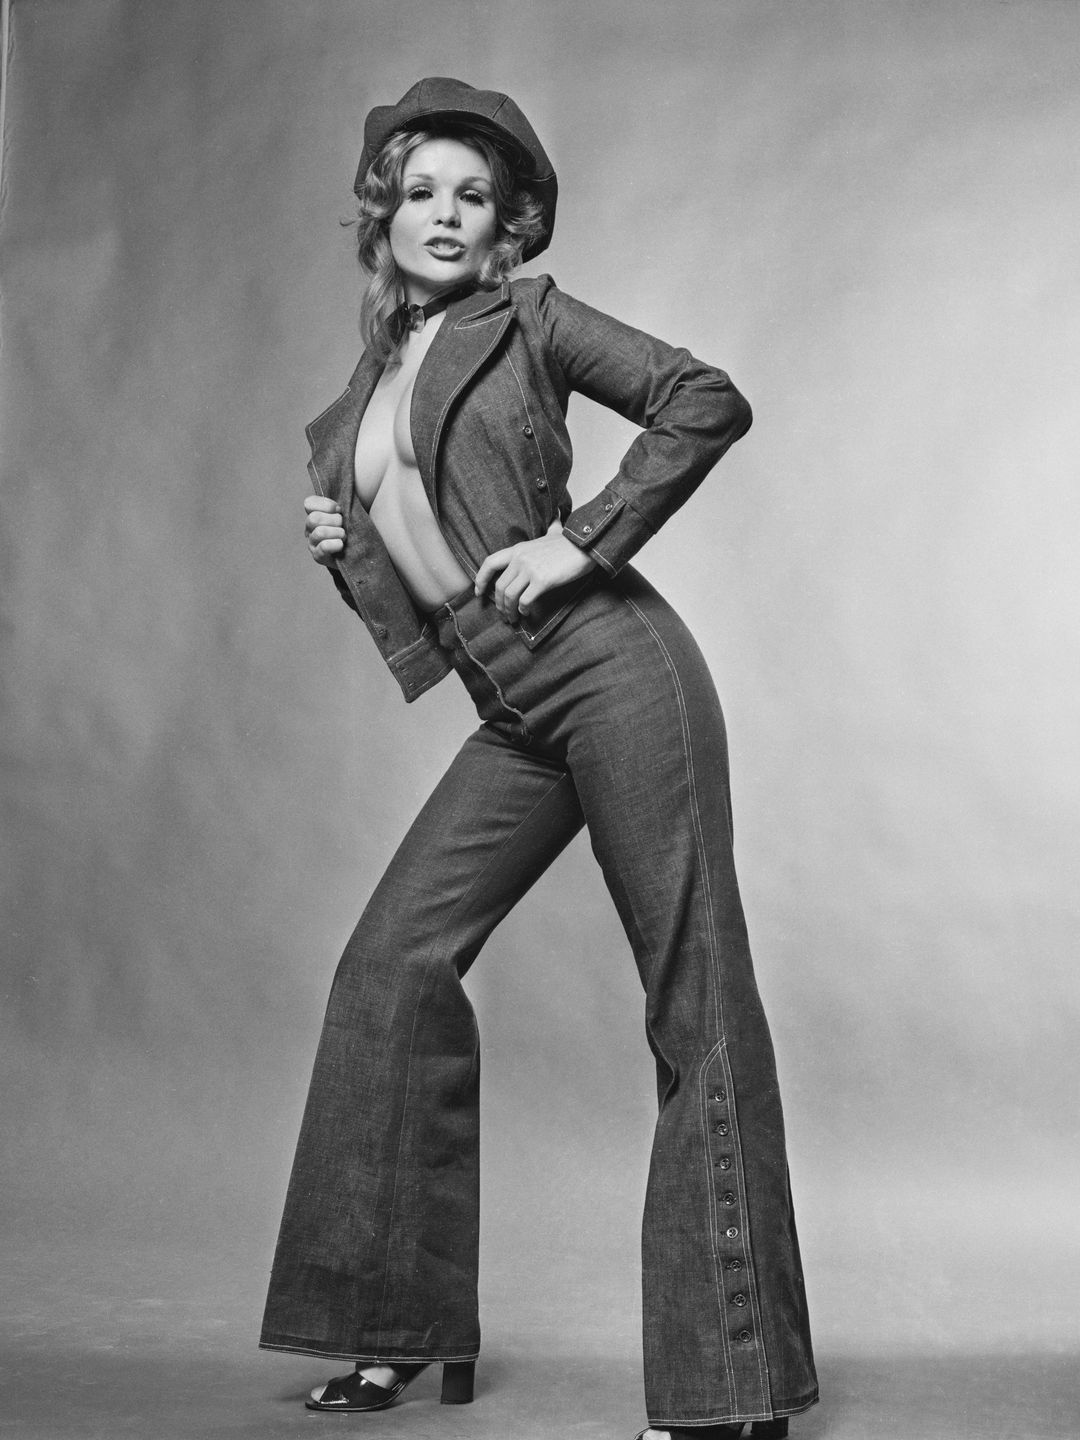 70s fashion trends